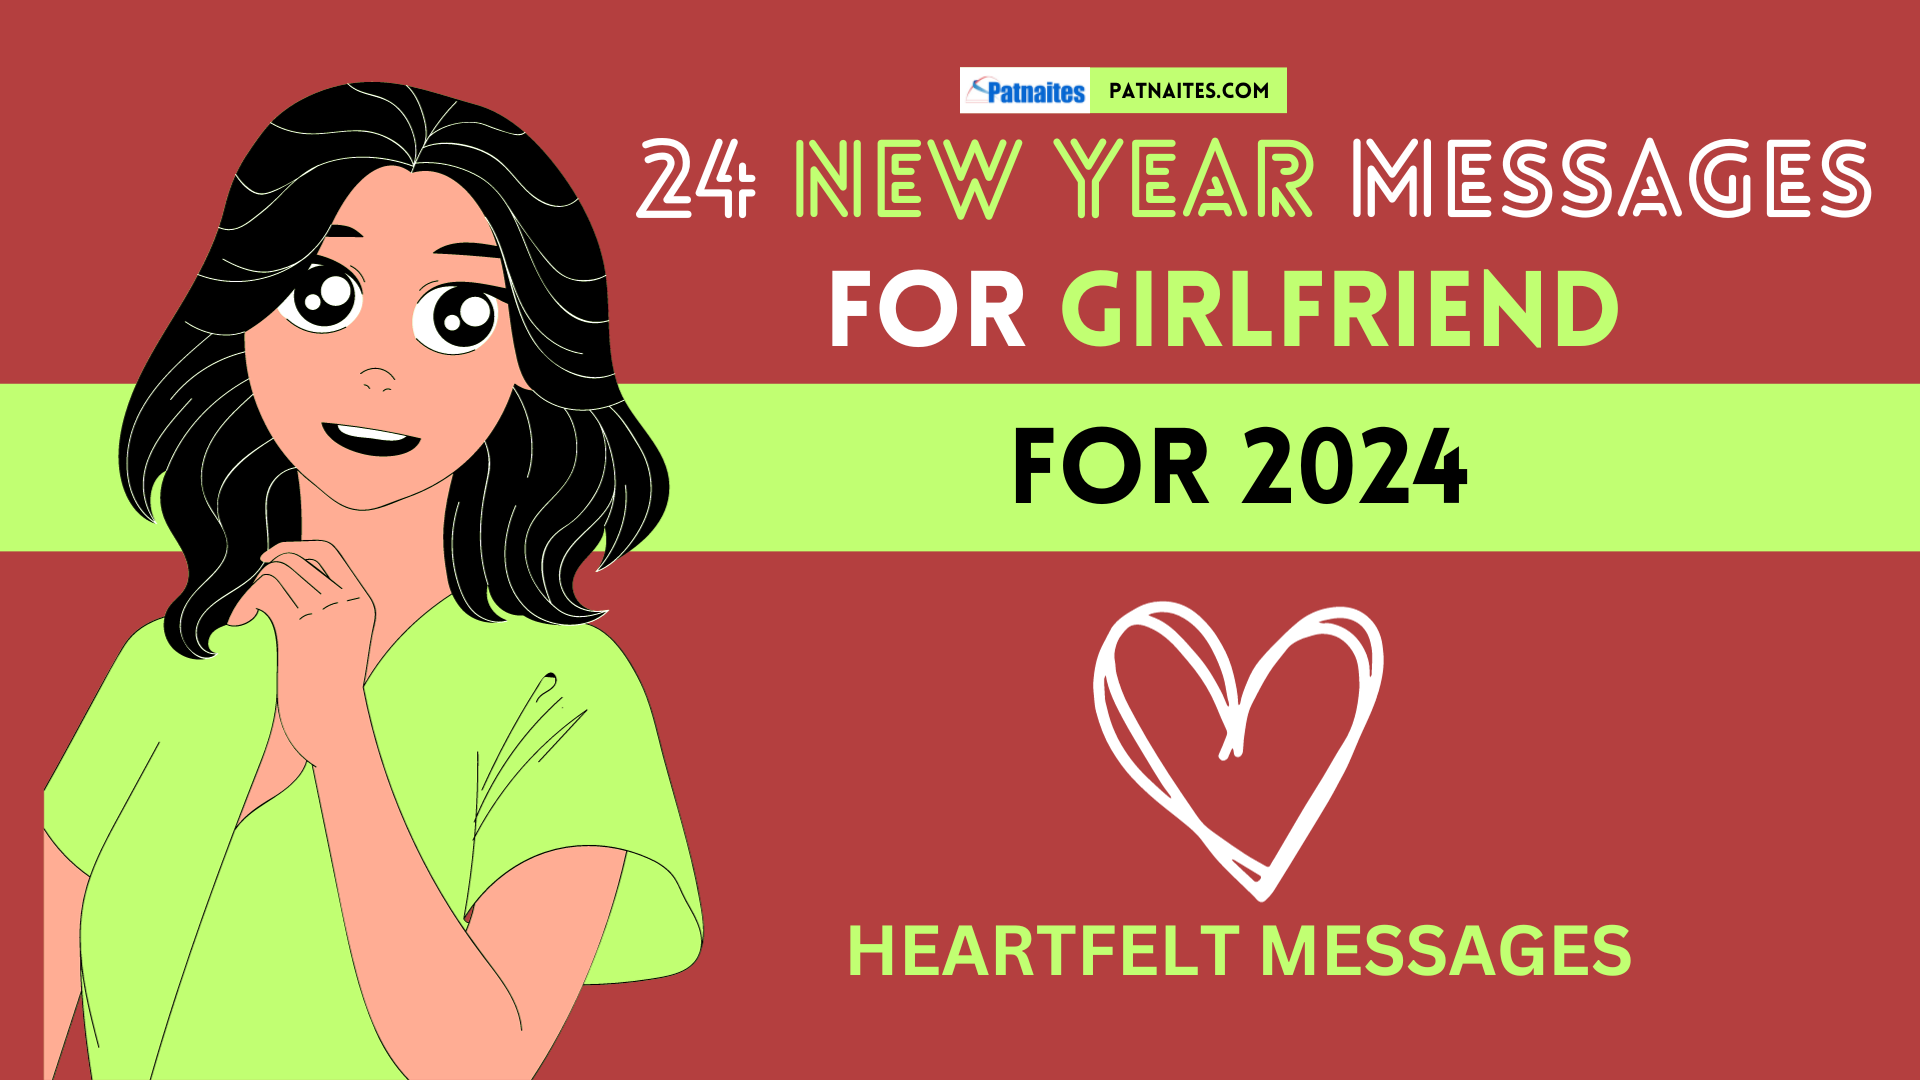 New Year Messages for Girlfriend